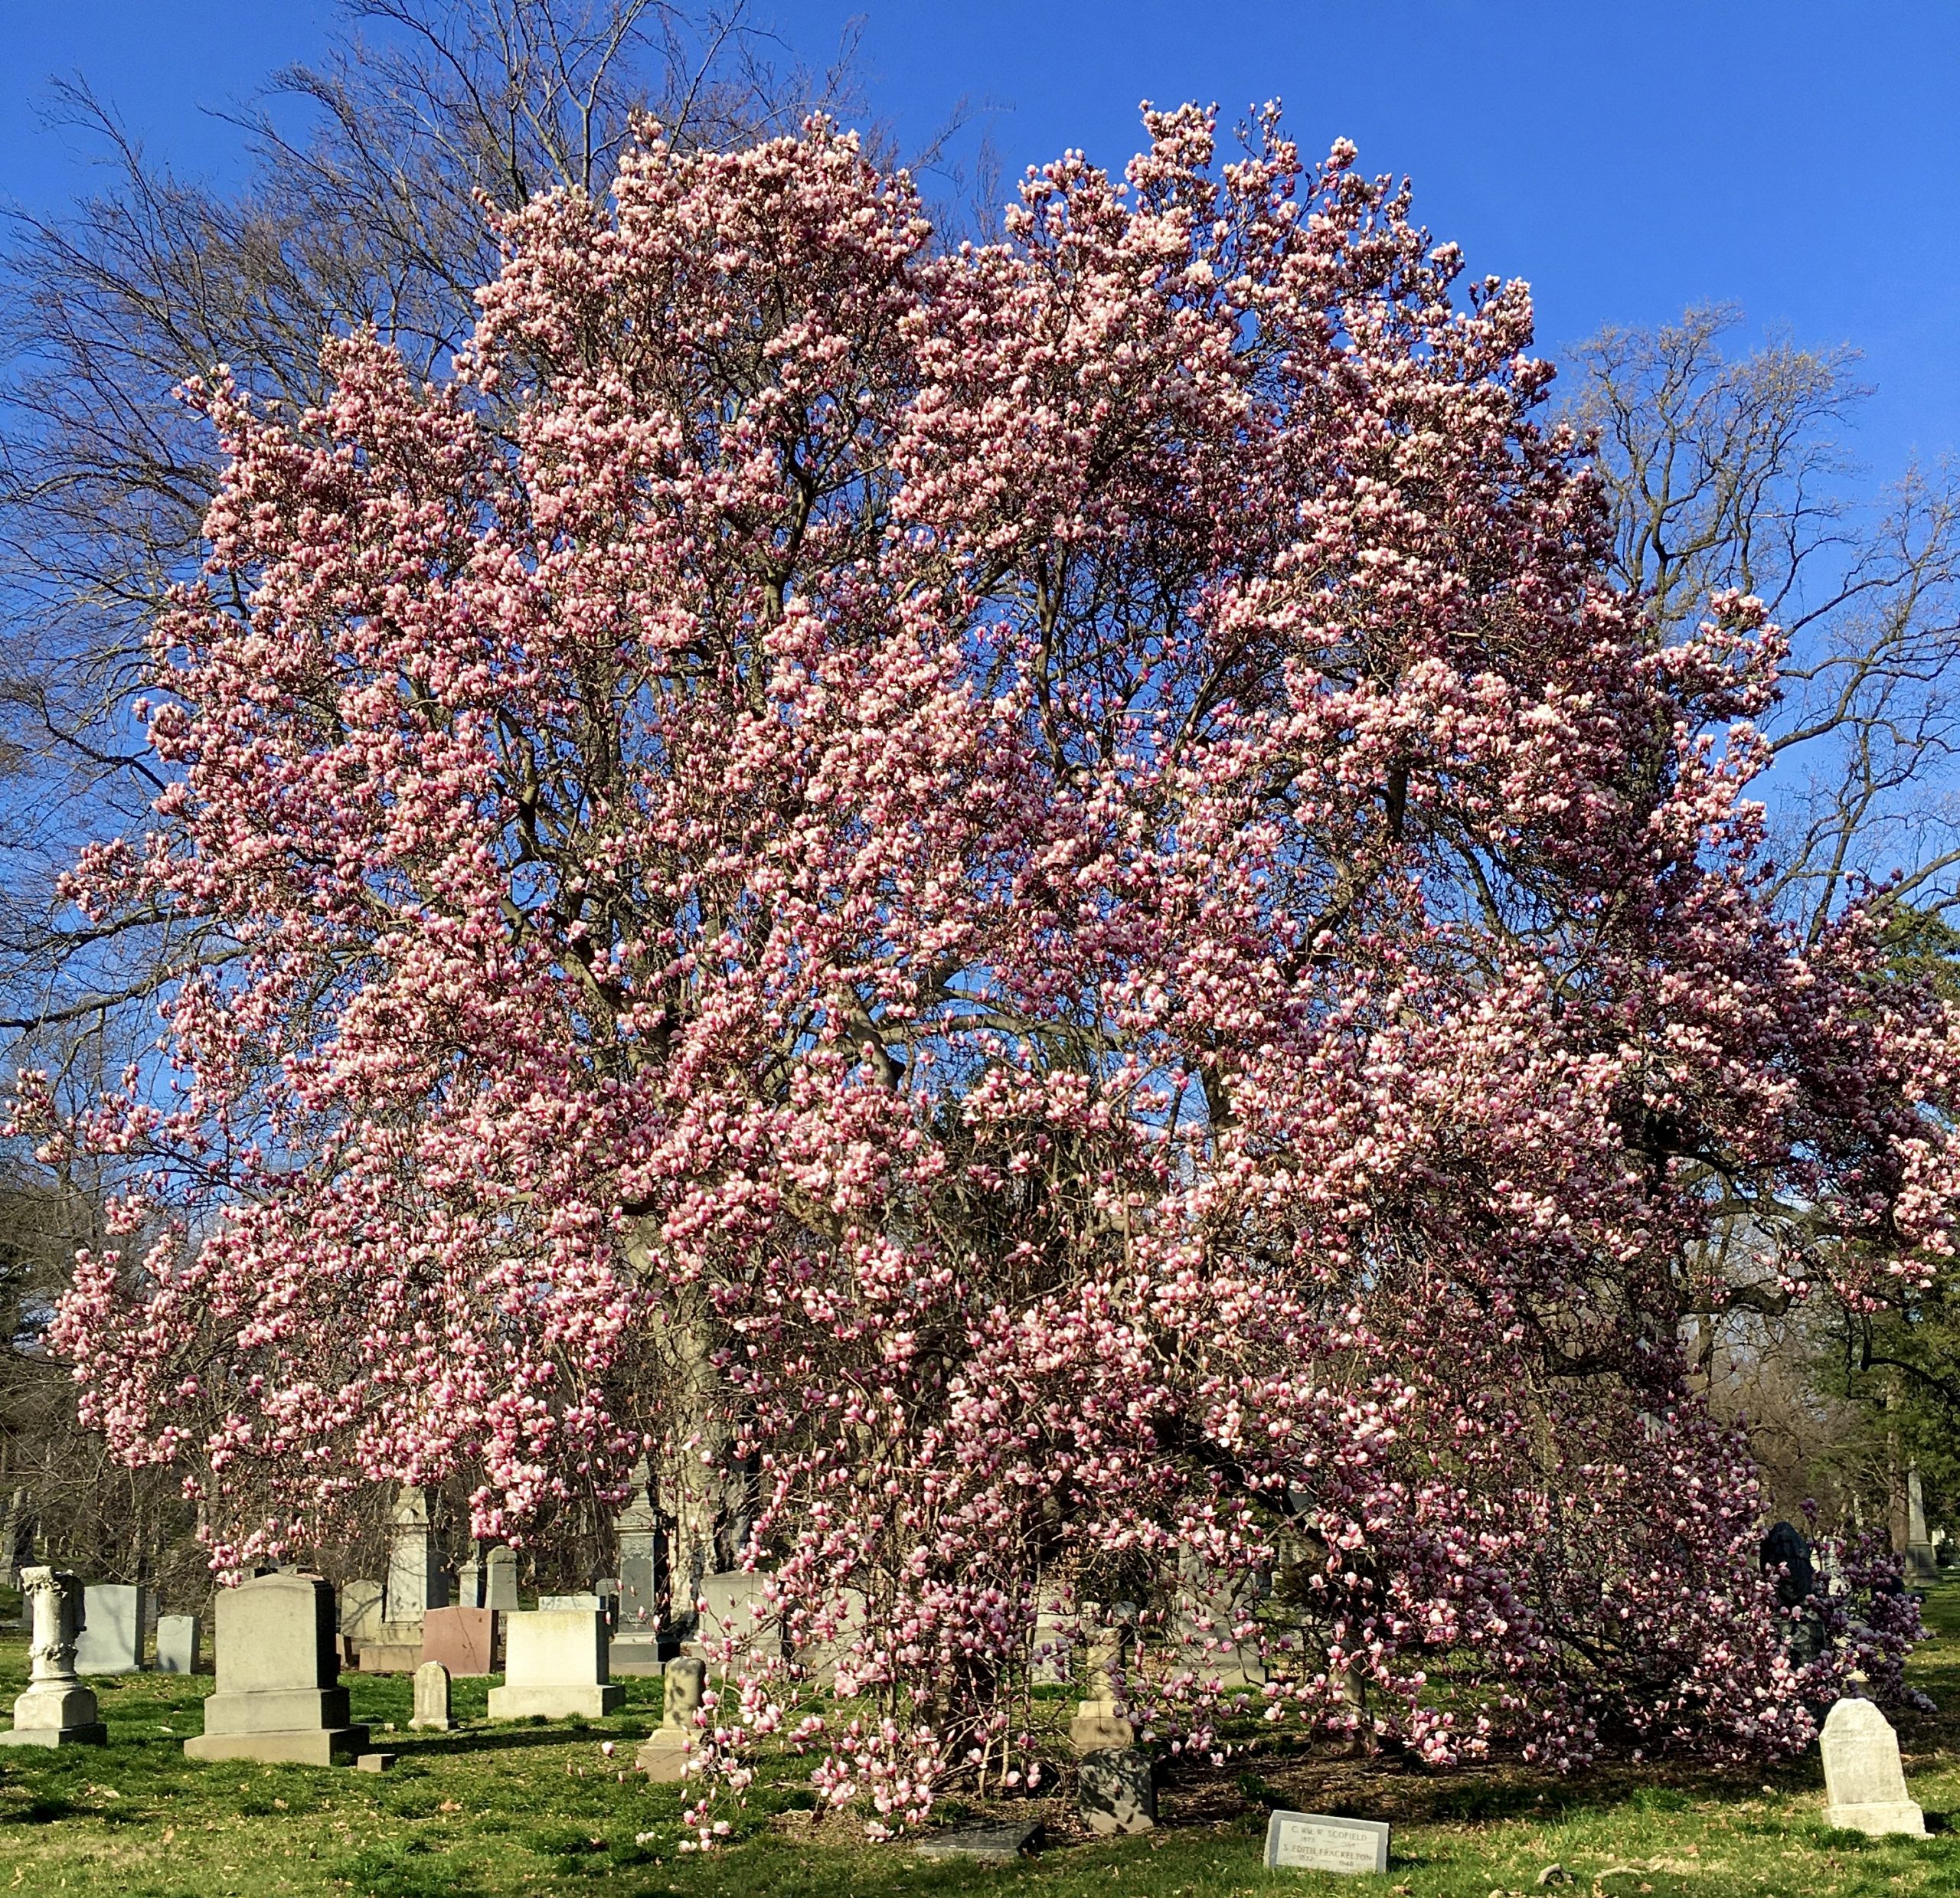 A magnolia tree blooms near William F. Bell’s grave. Photo: Lore Croghan/Brooklyn Eagle